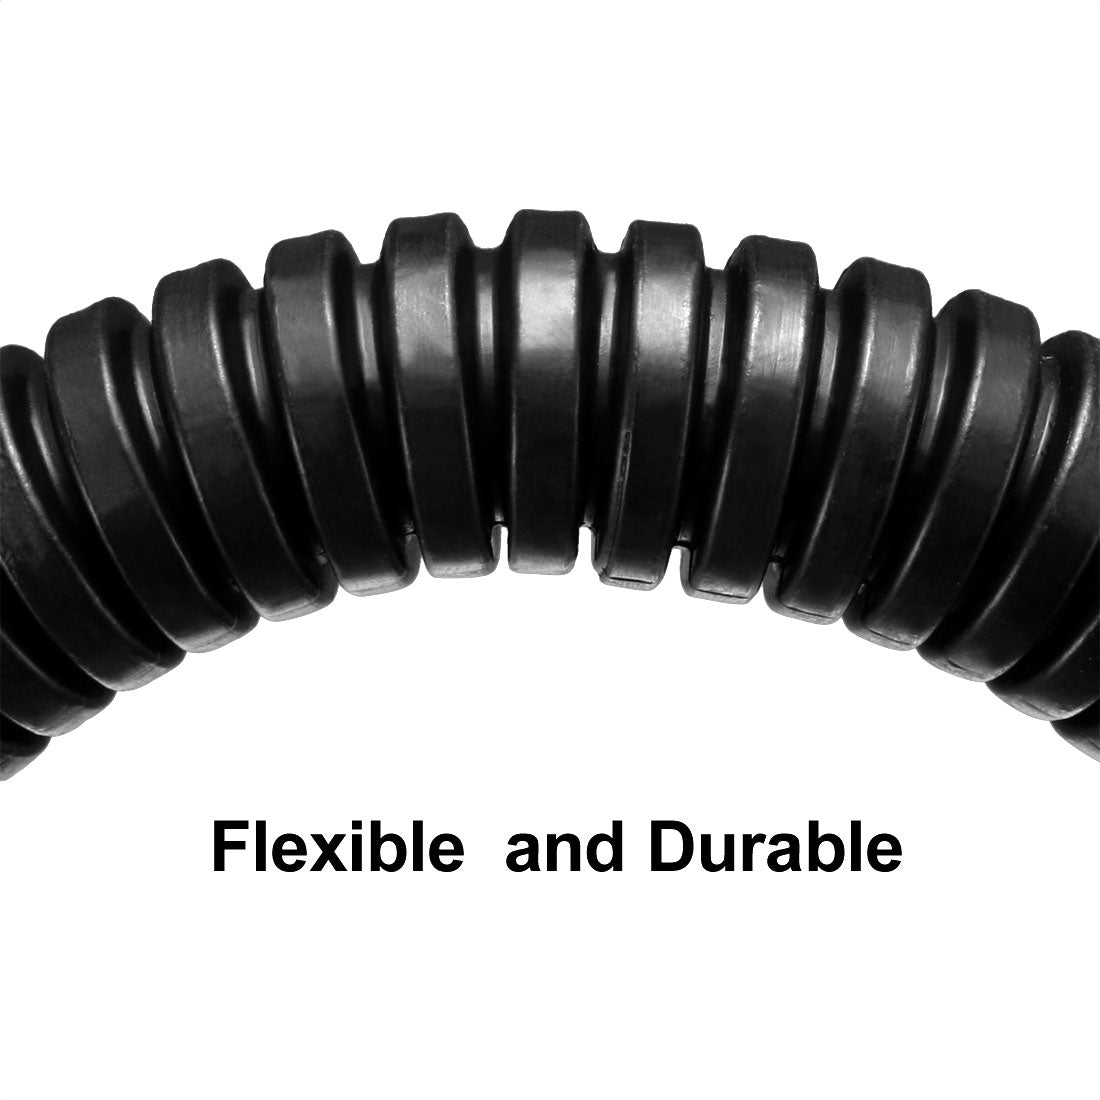 uxcell Uxcell 12.5 M 6.5 x 10 mm PP Flexible Corrugated Conduit Tube for Garden,Office Black